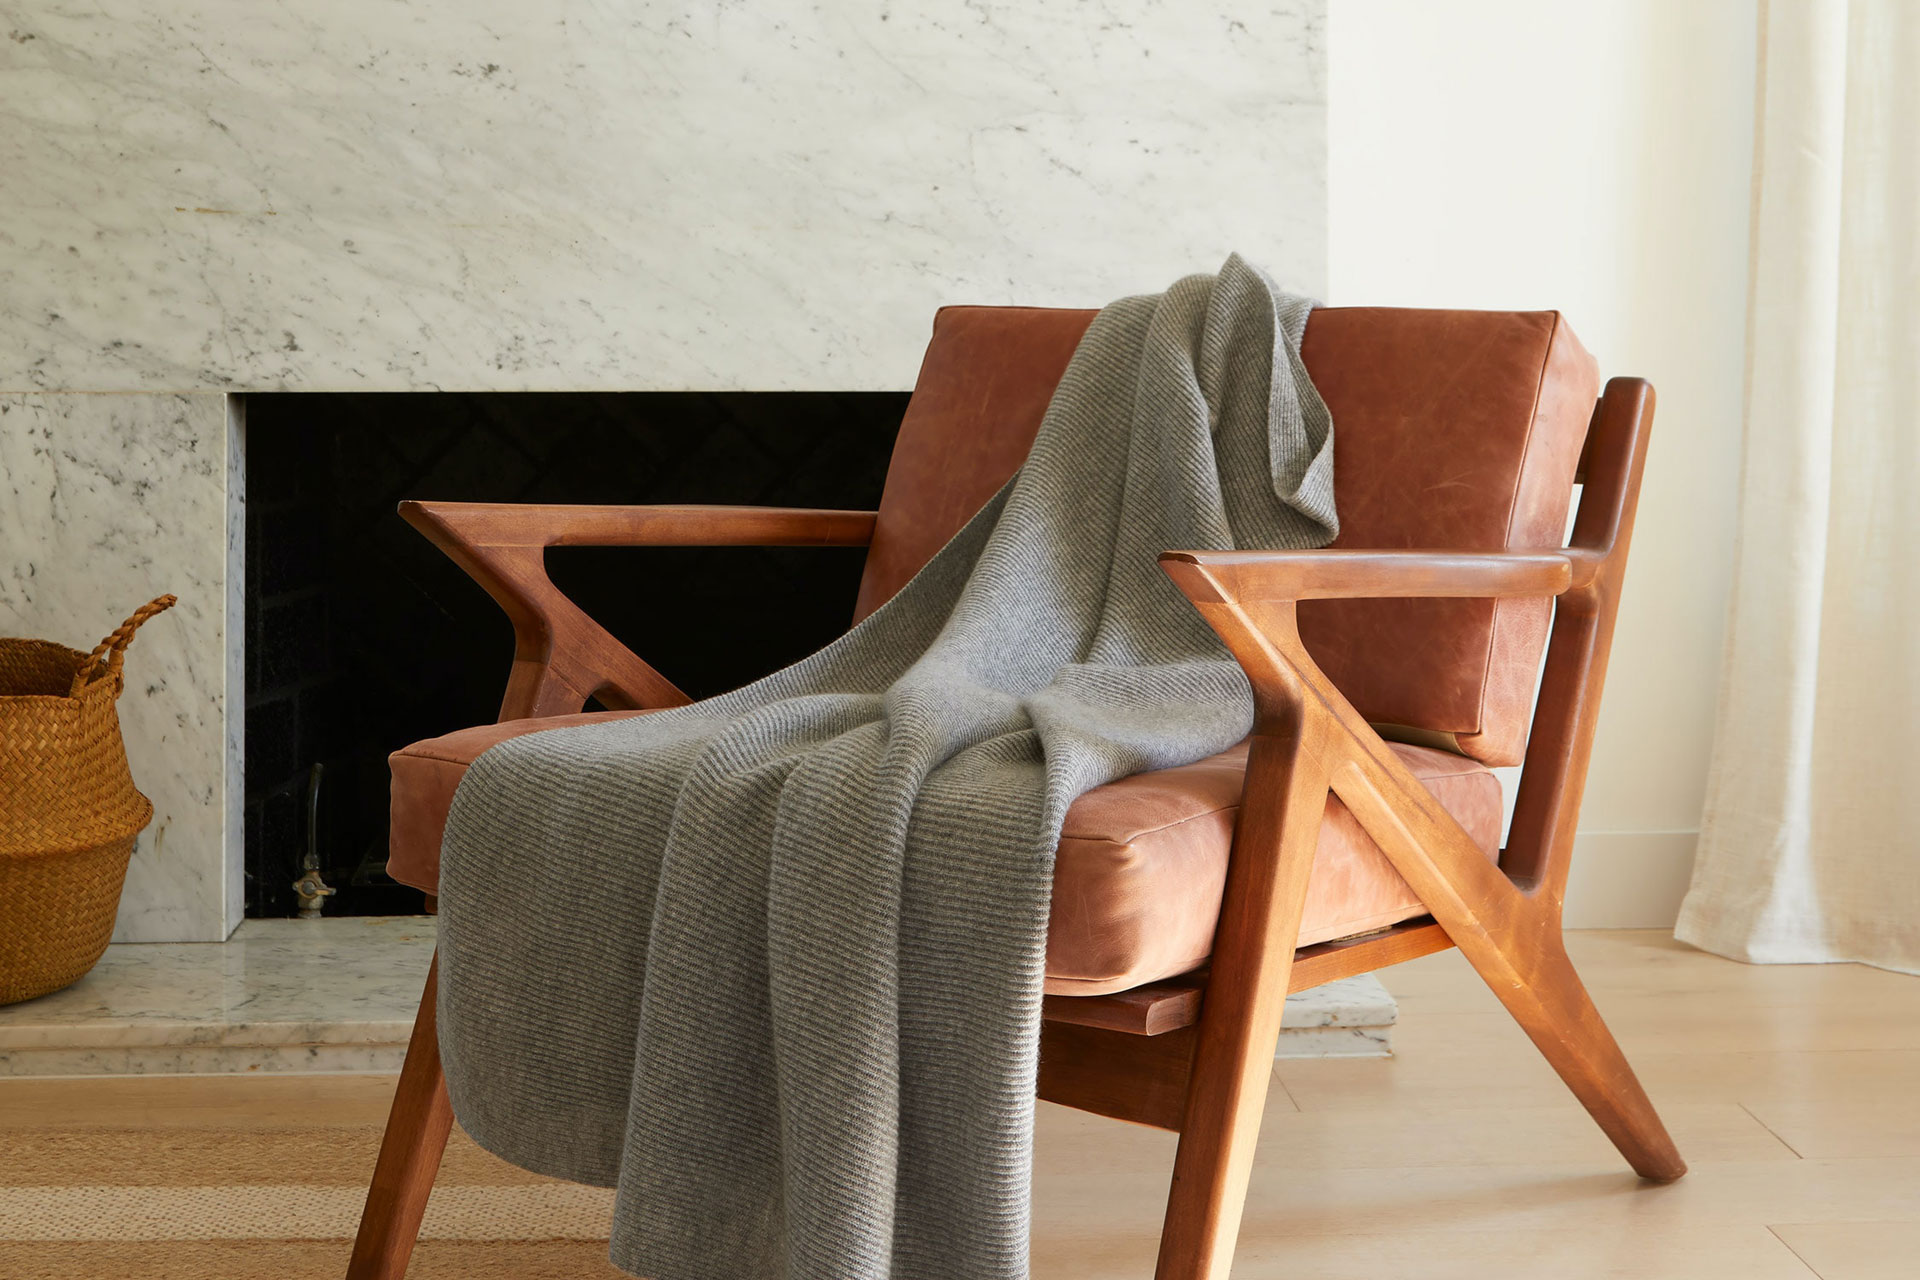 Cashmere throw, picture by Italic